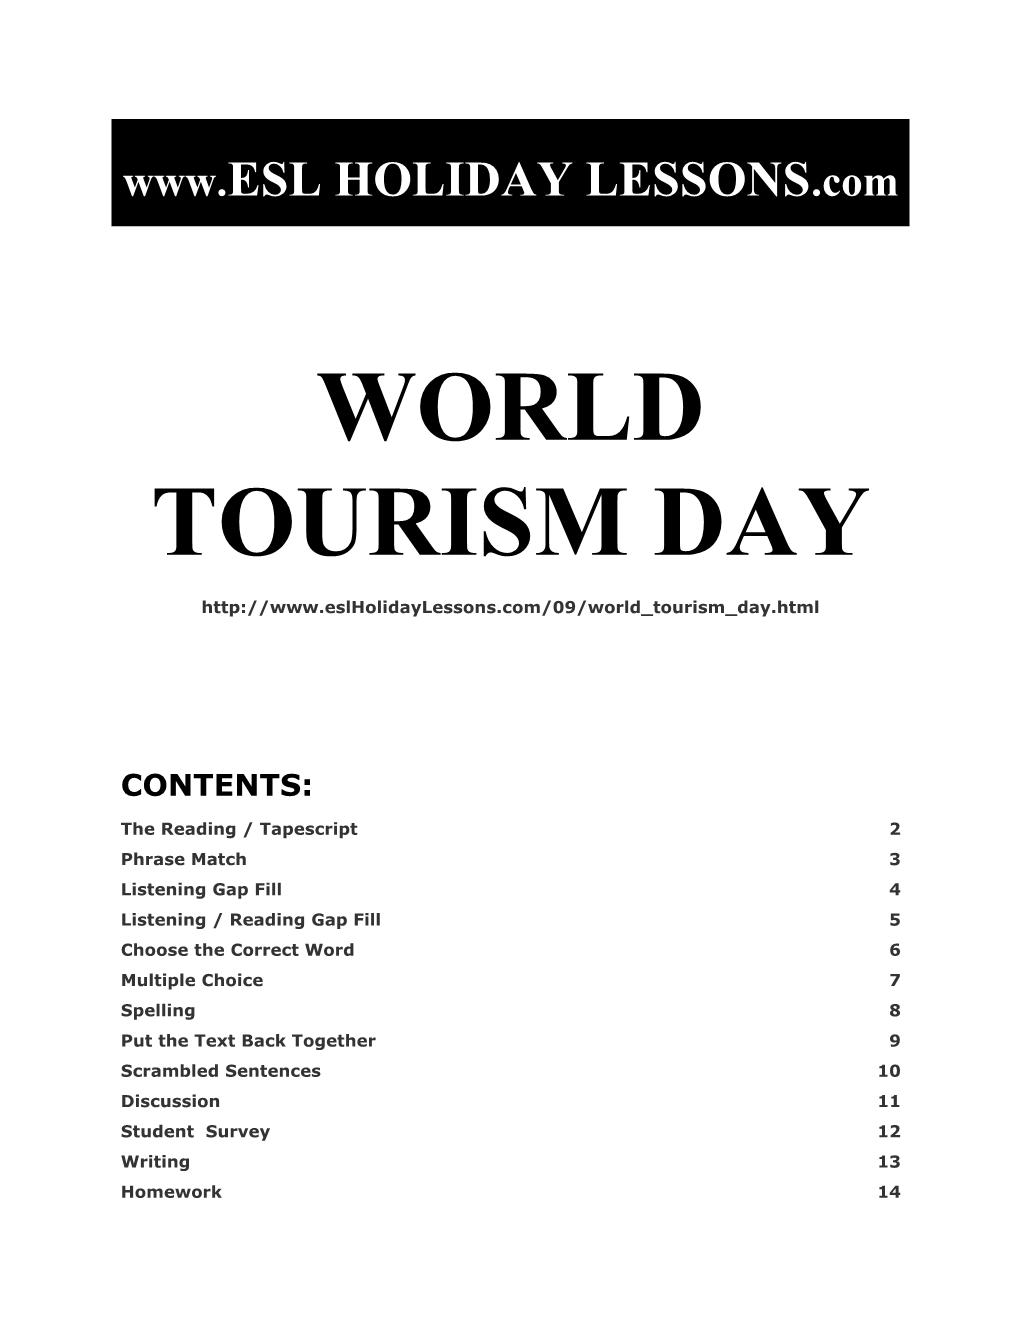 Holiday Lessons - World Tourism Day